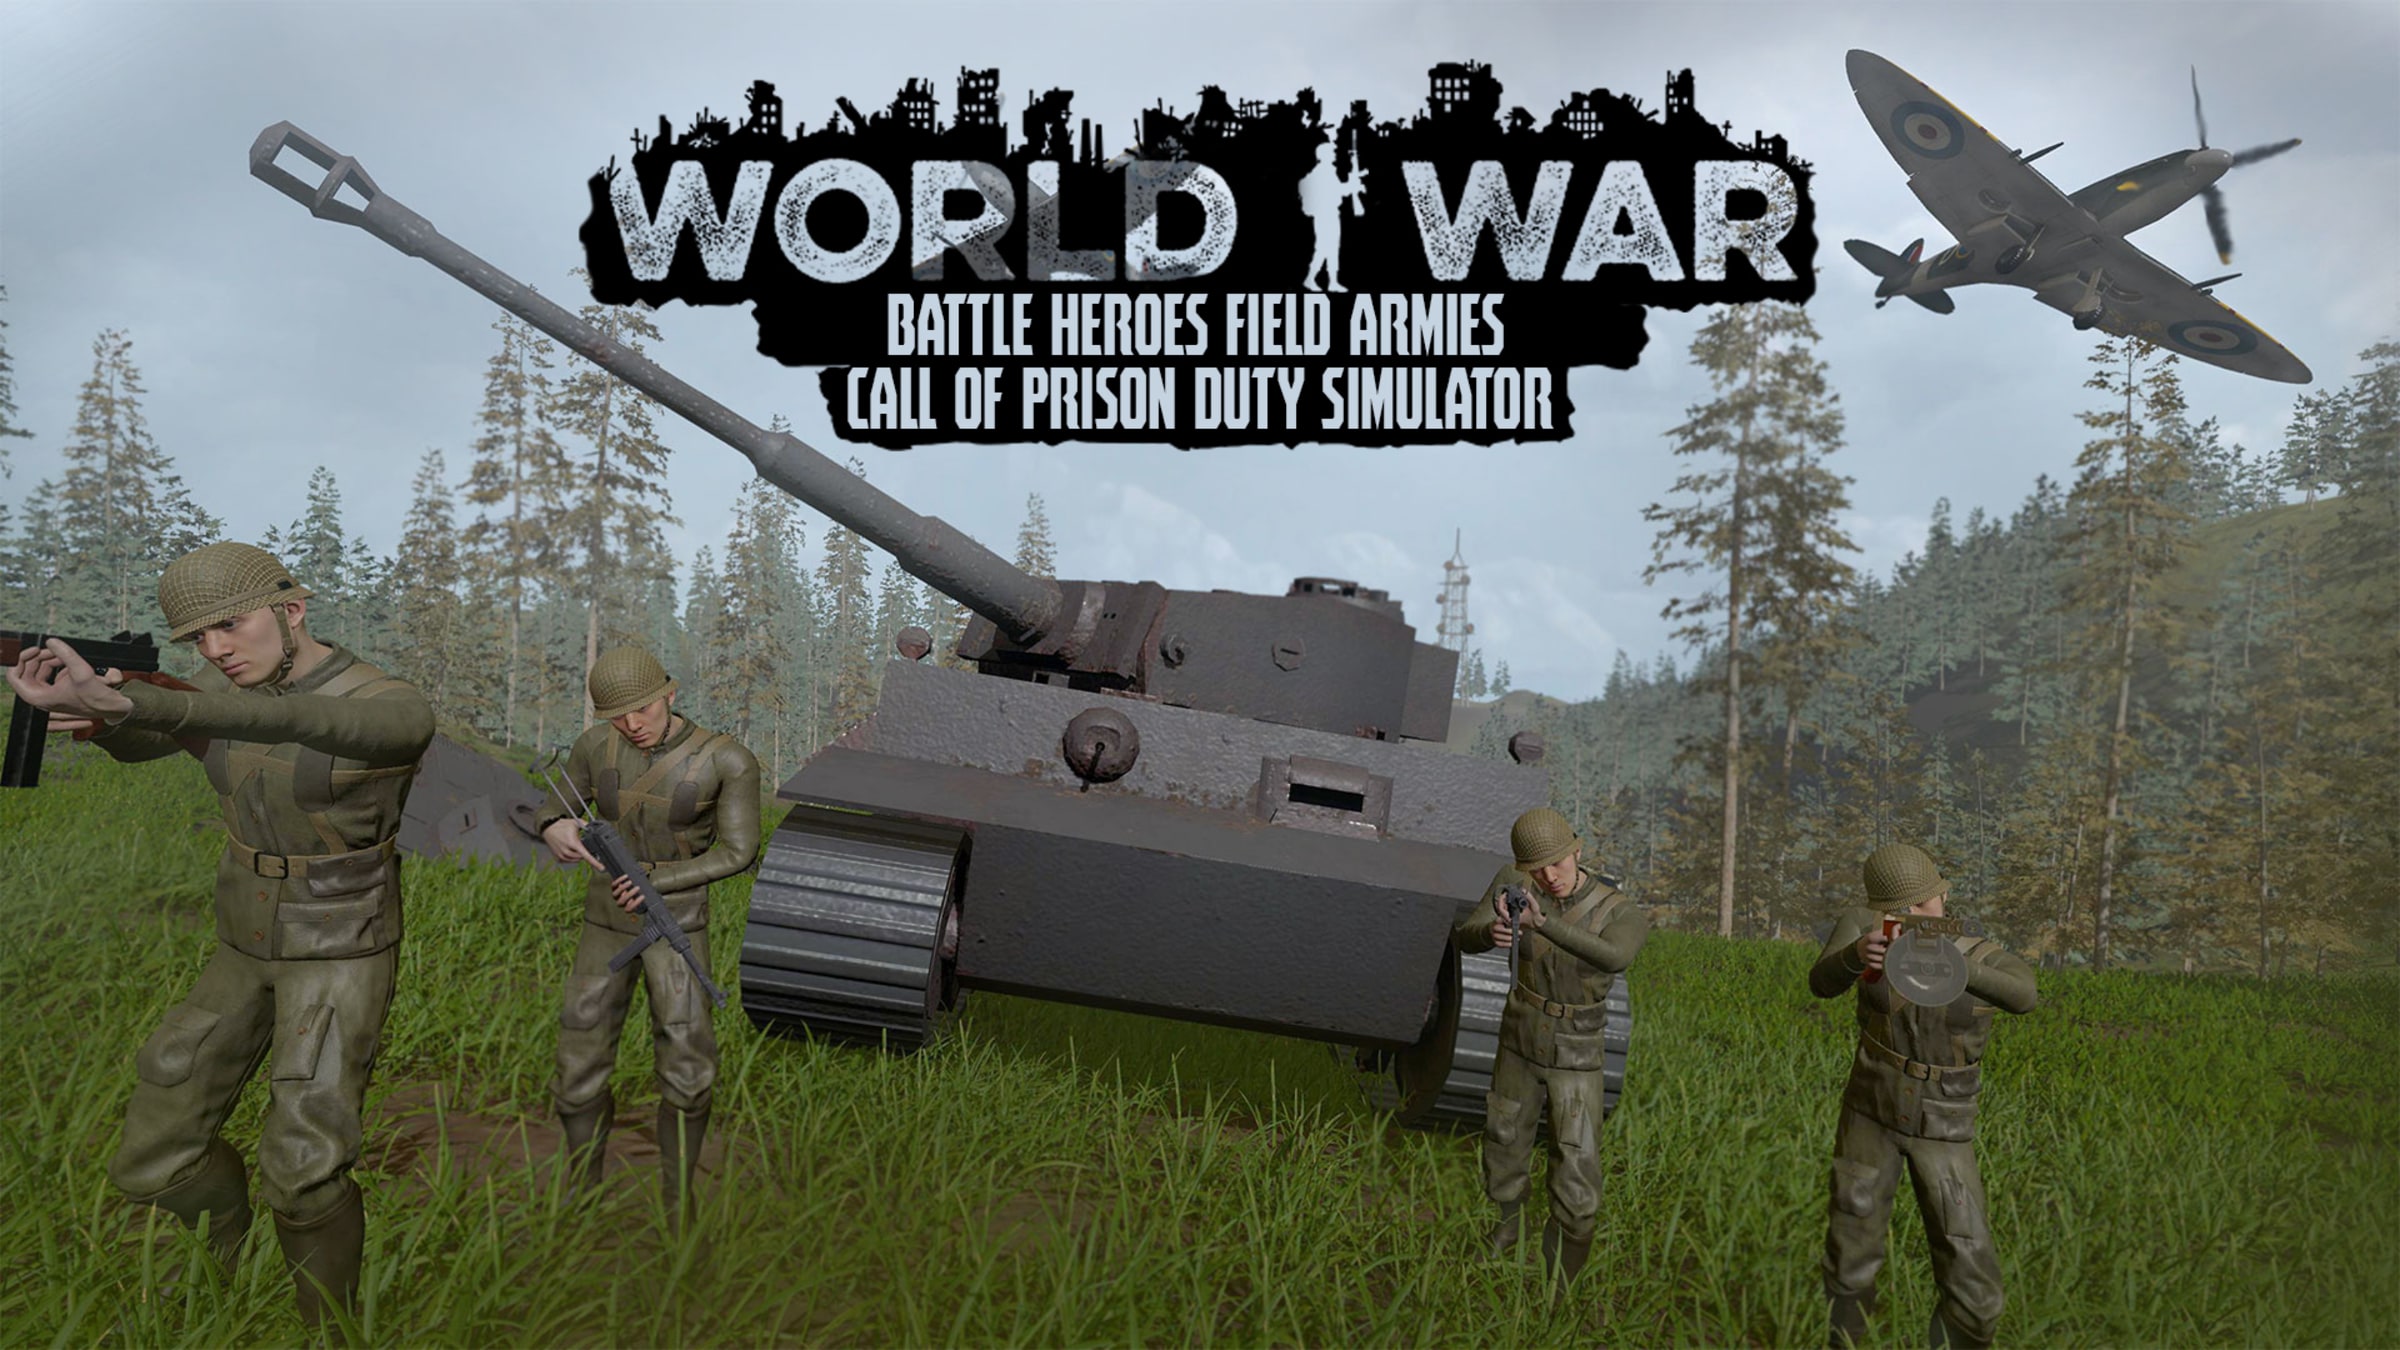 World War Battle Heroes Field Armies Call of Prison Duty Simulator for  Nintendo Switch - Nintendo Official Site